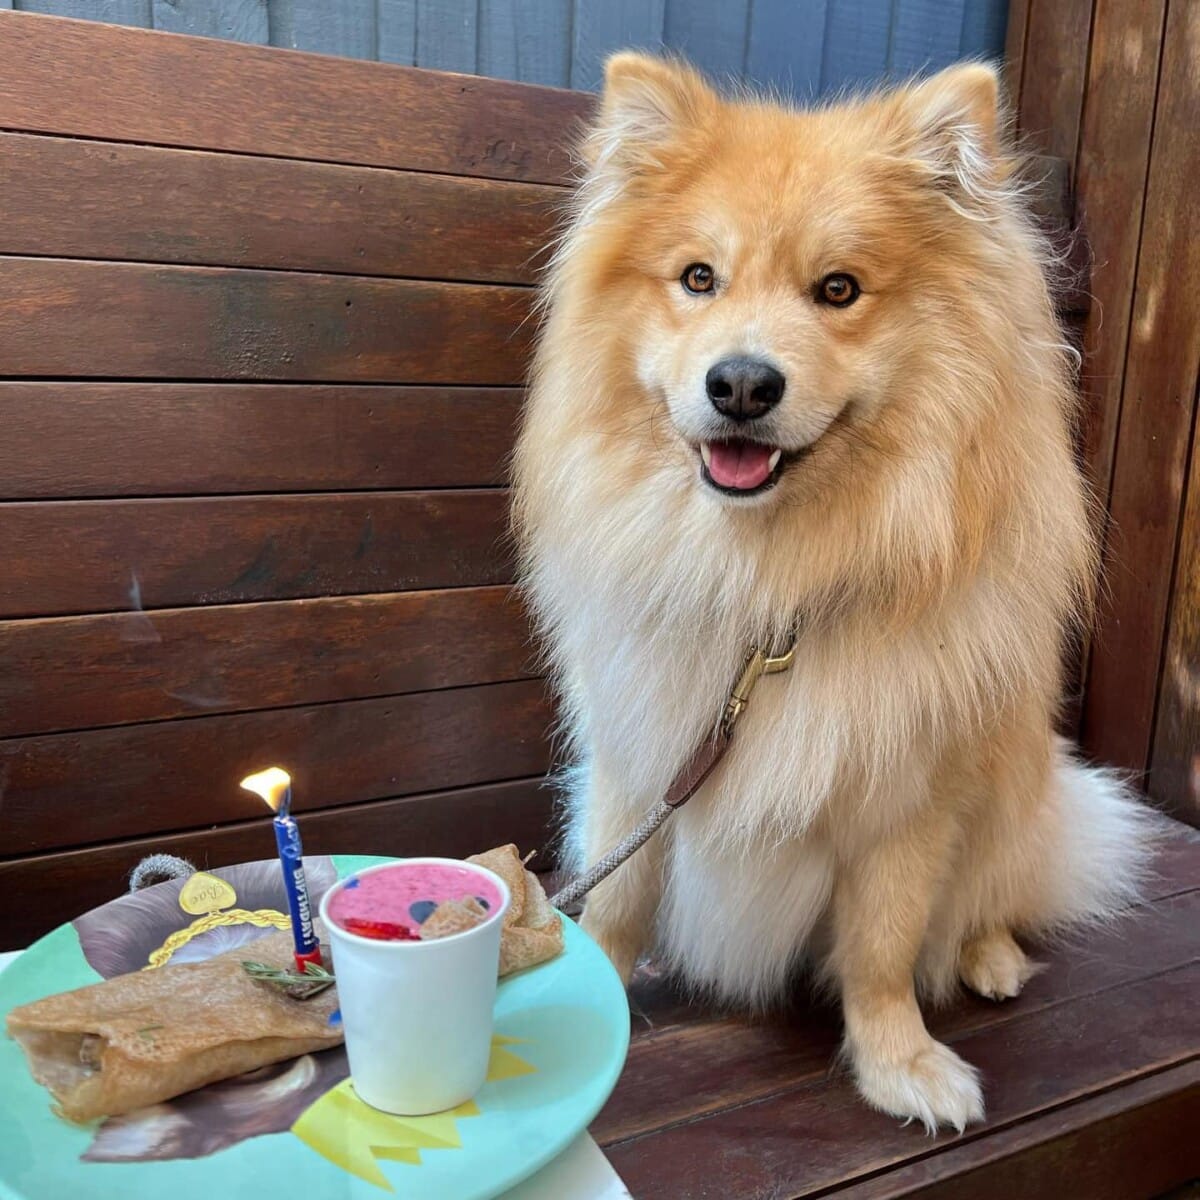 A medium-sized brown fluffy dog celebrates its birthday in style at a dog-friendly cafe in Melbourne, with a small birthday cake made just for the furry birthday companion